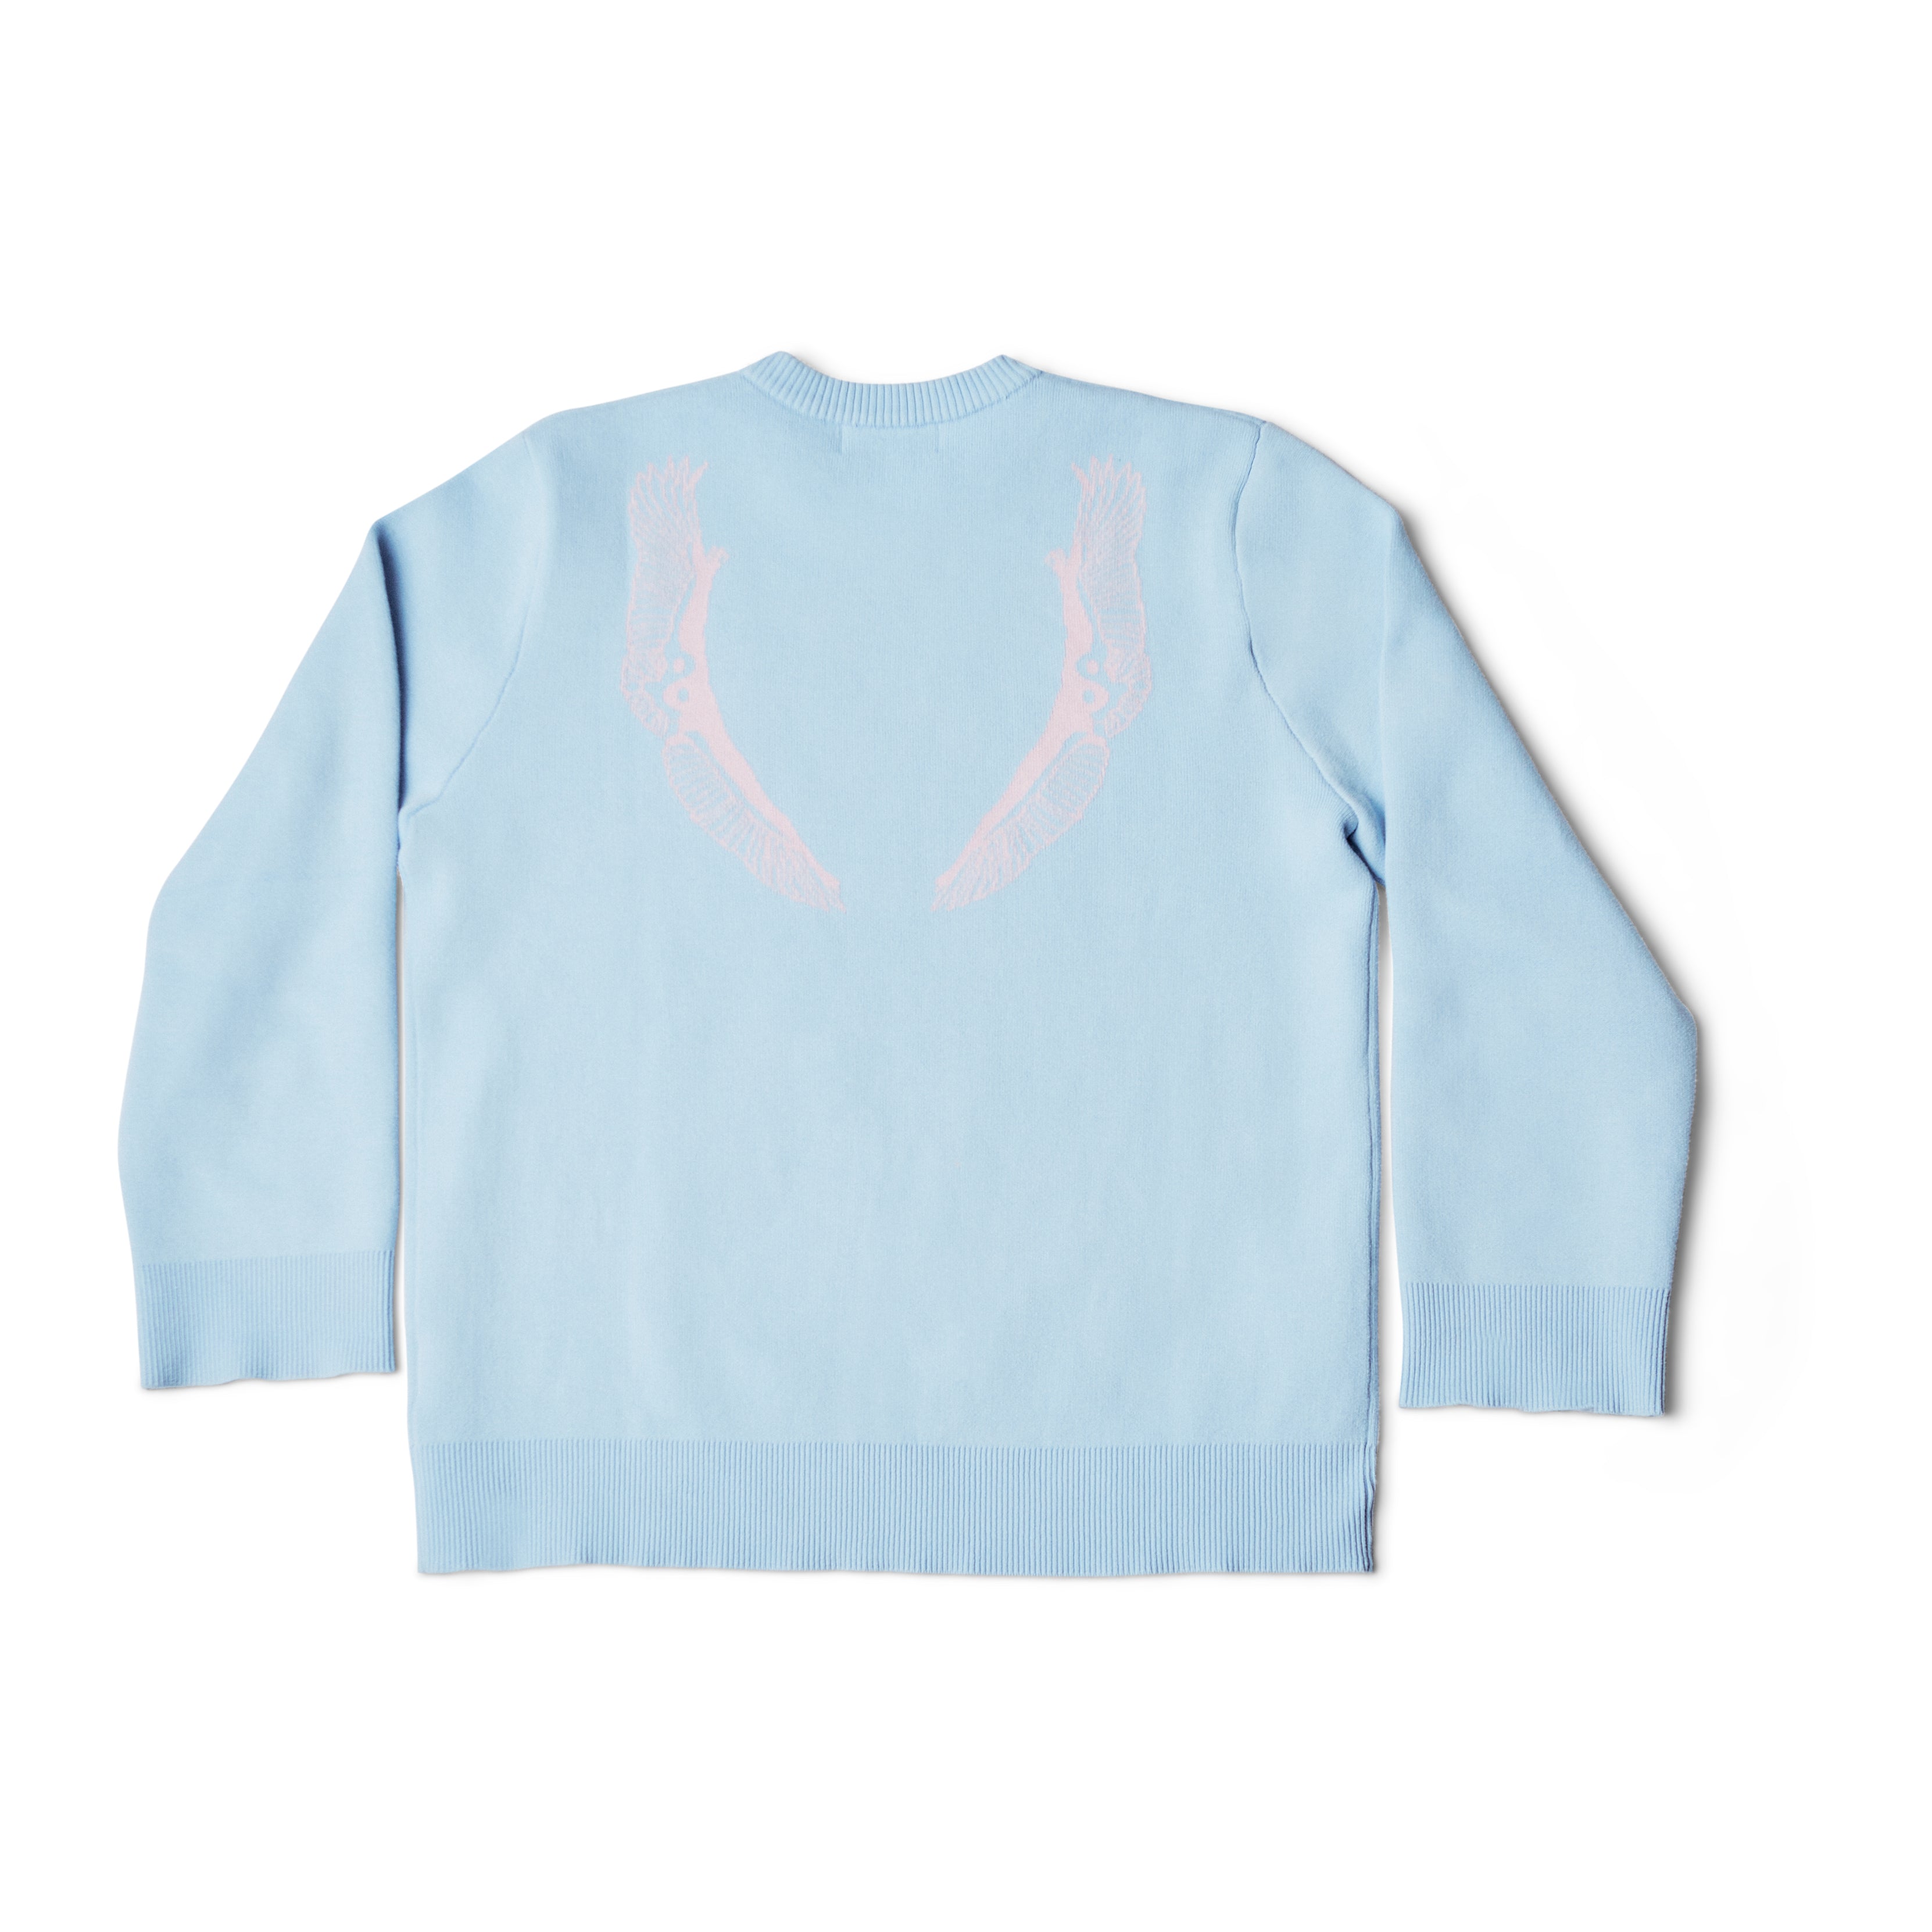 COTTON CANDY KNIT SWEATER